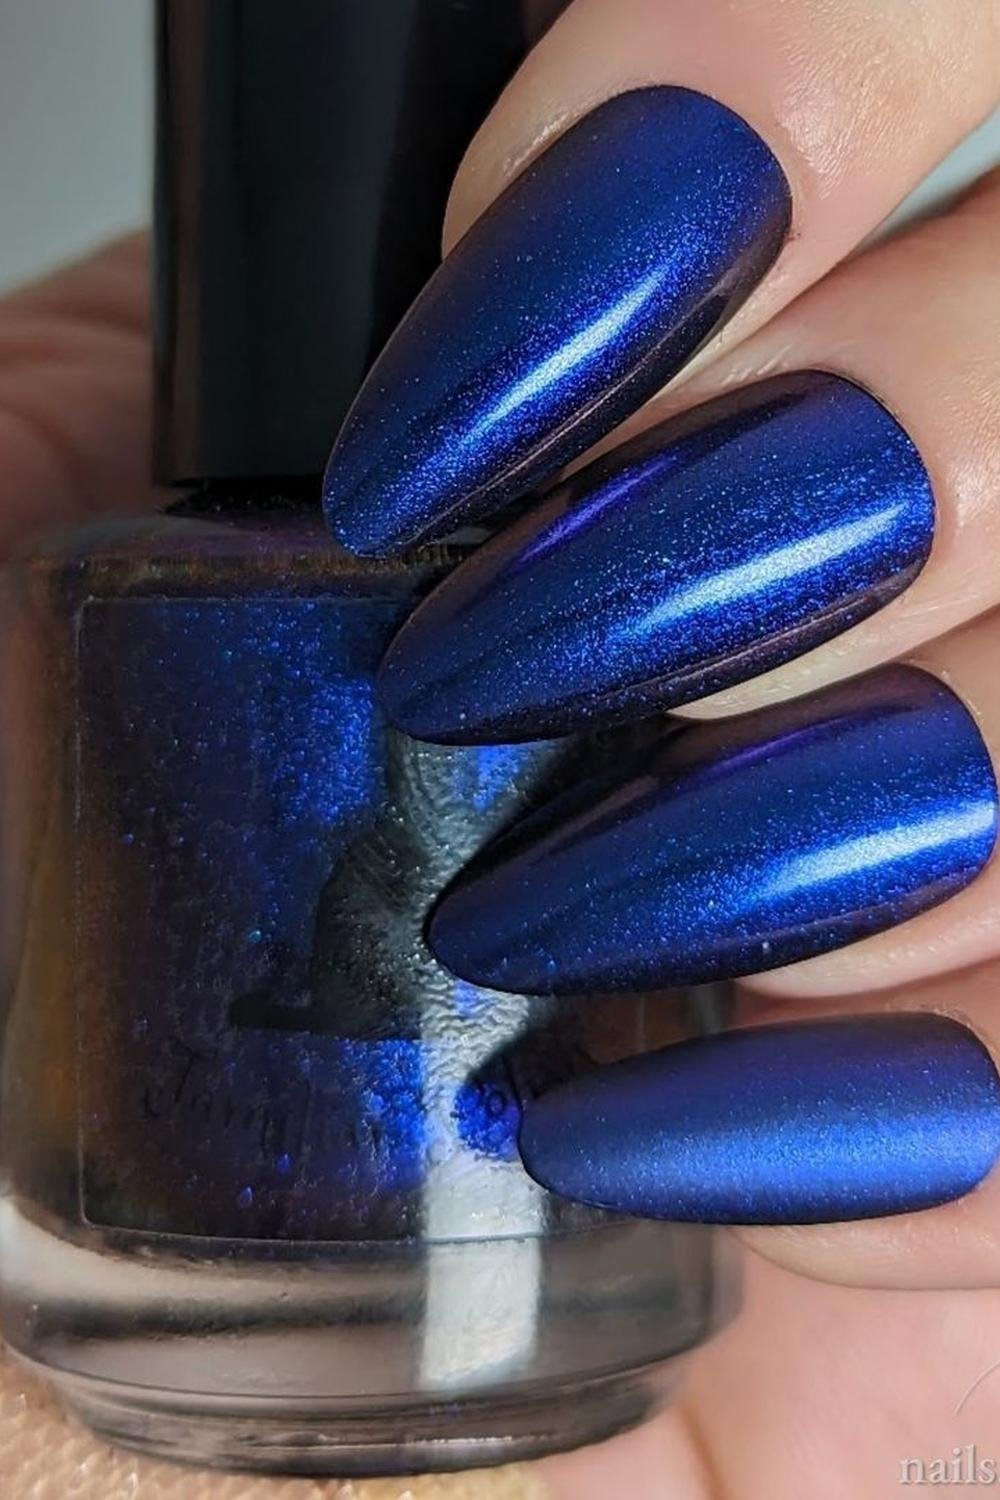 4 - Picture of Blue Chrome Nails